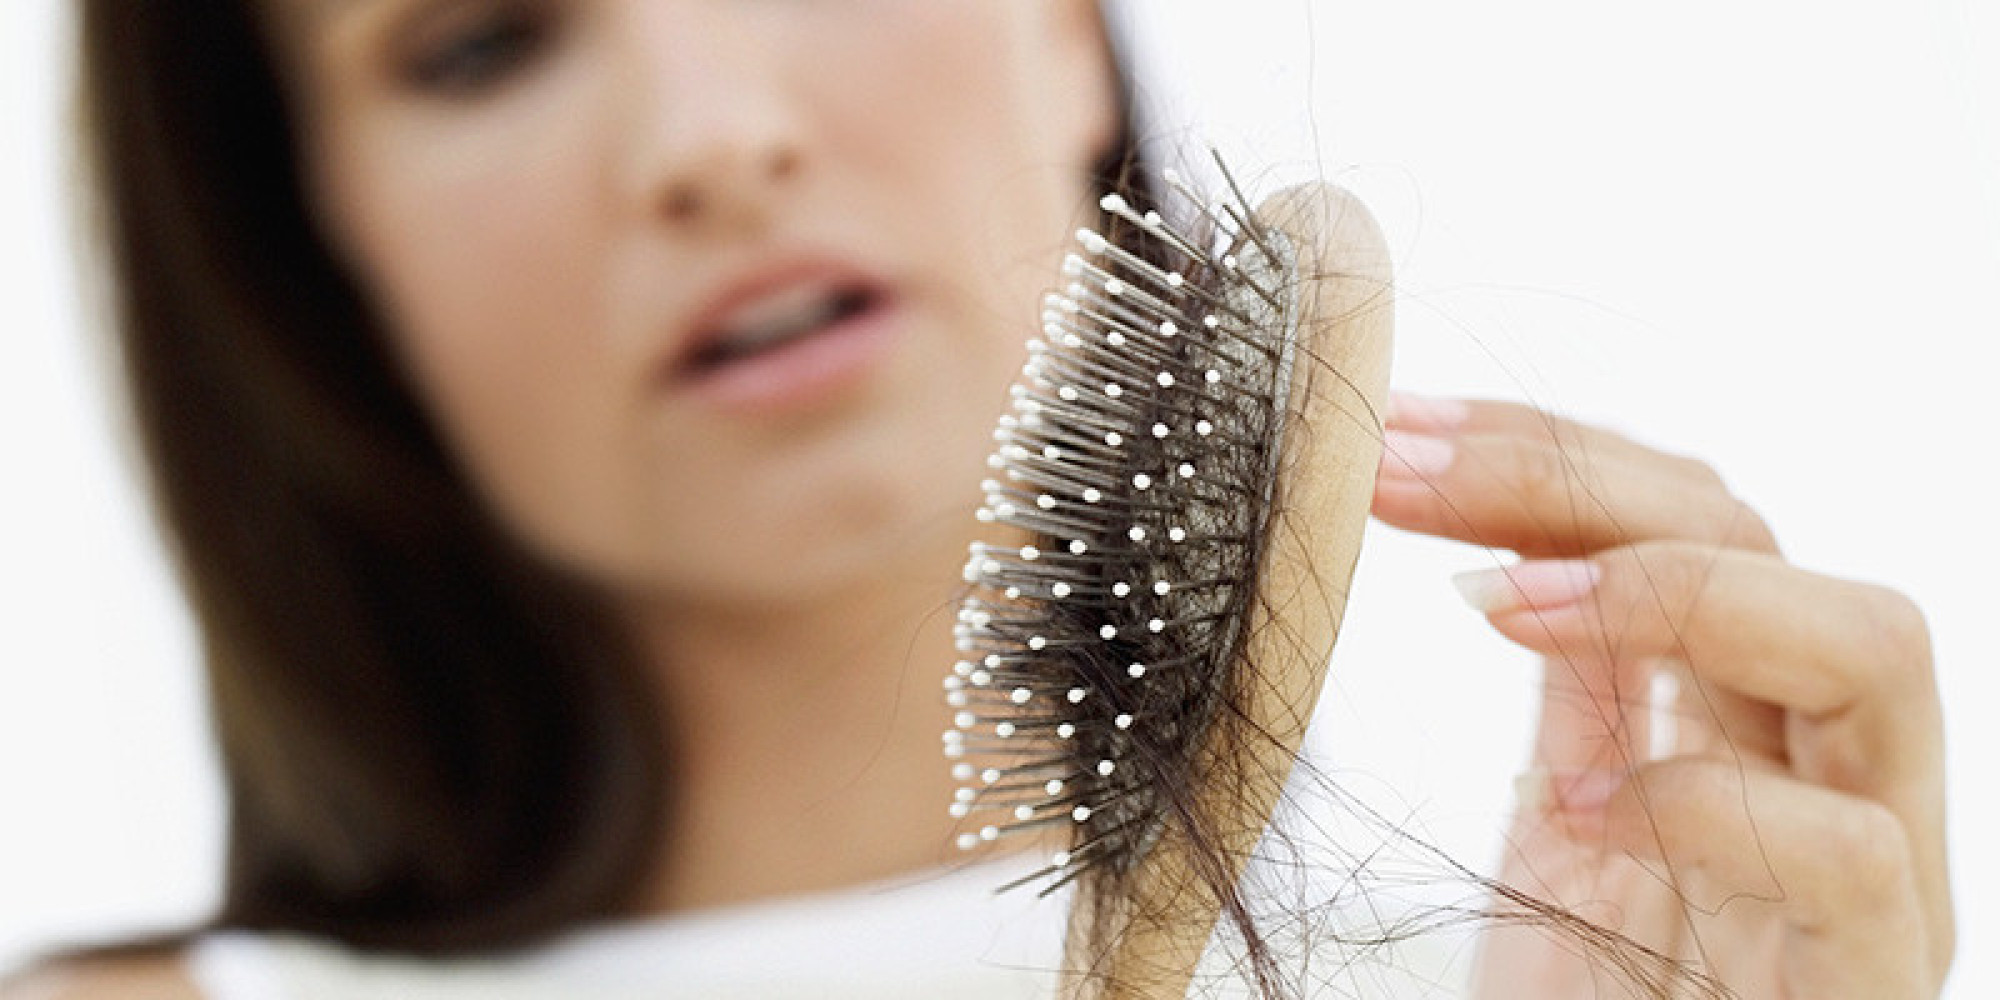 What To Do If You Notice Unusual Hair Loss